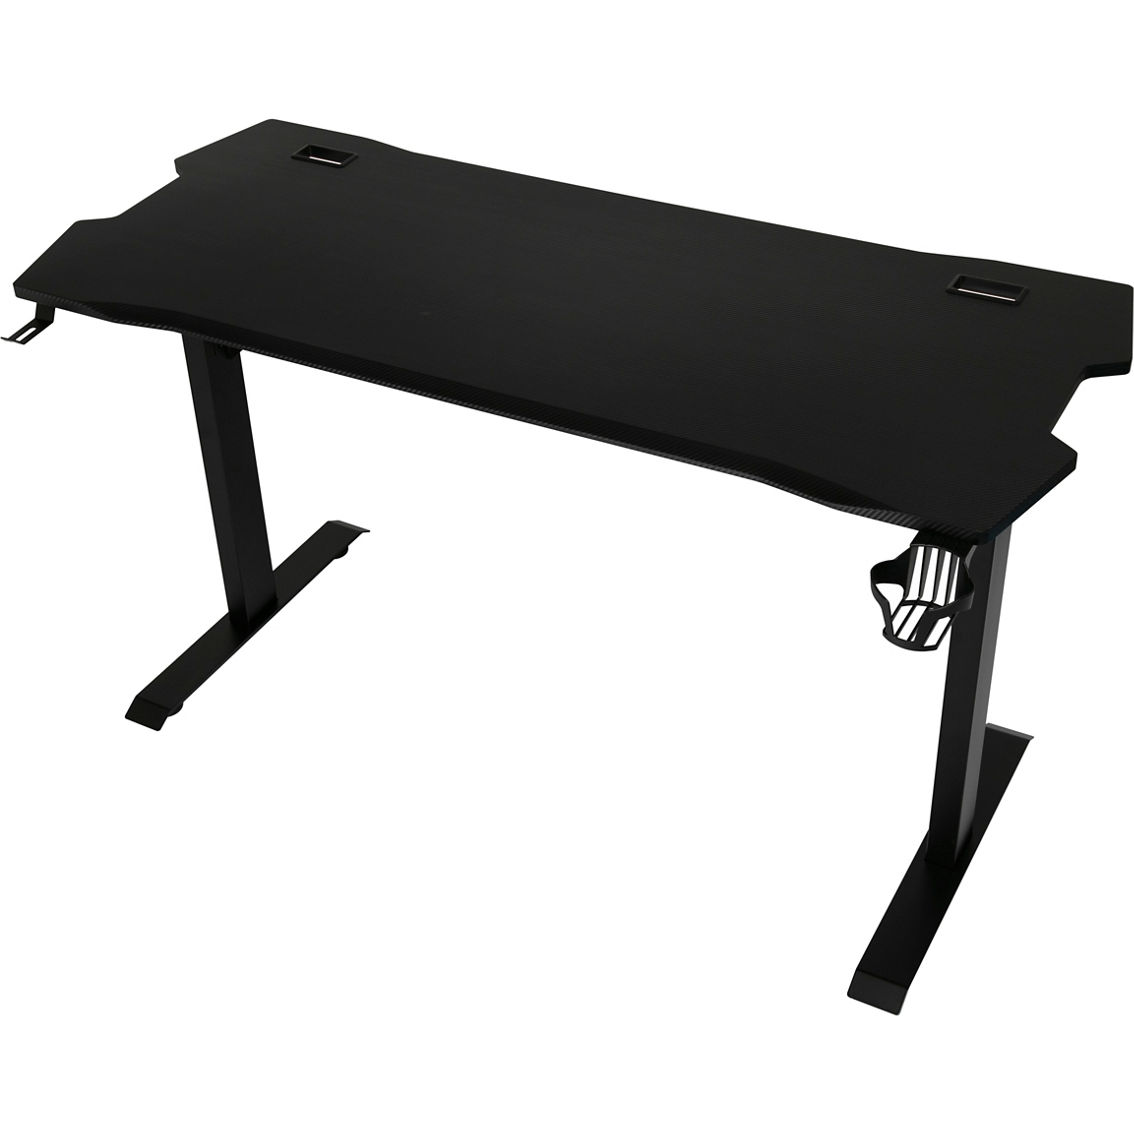 Simply Perfect 55 in. Ergonomic Home Office Computer Gaming Desk - Image 3 of 5